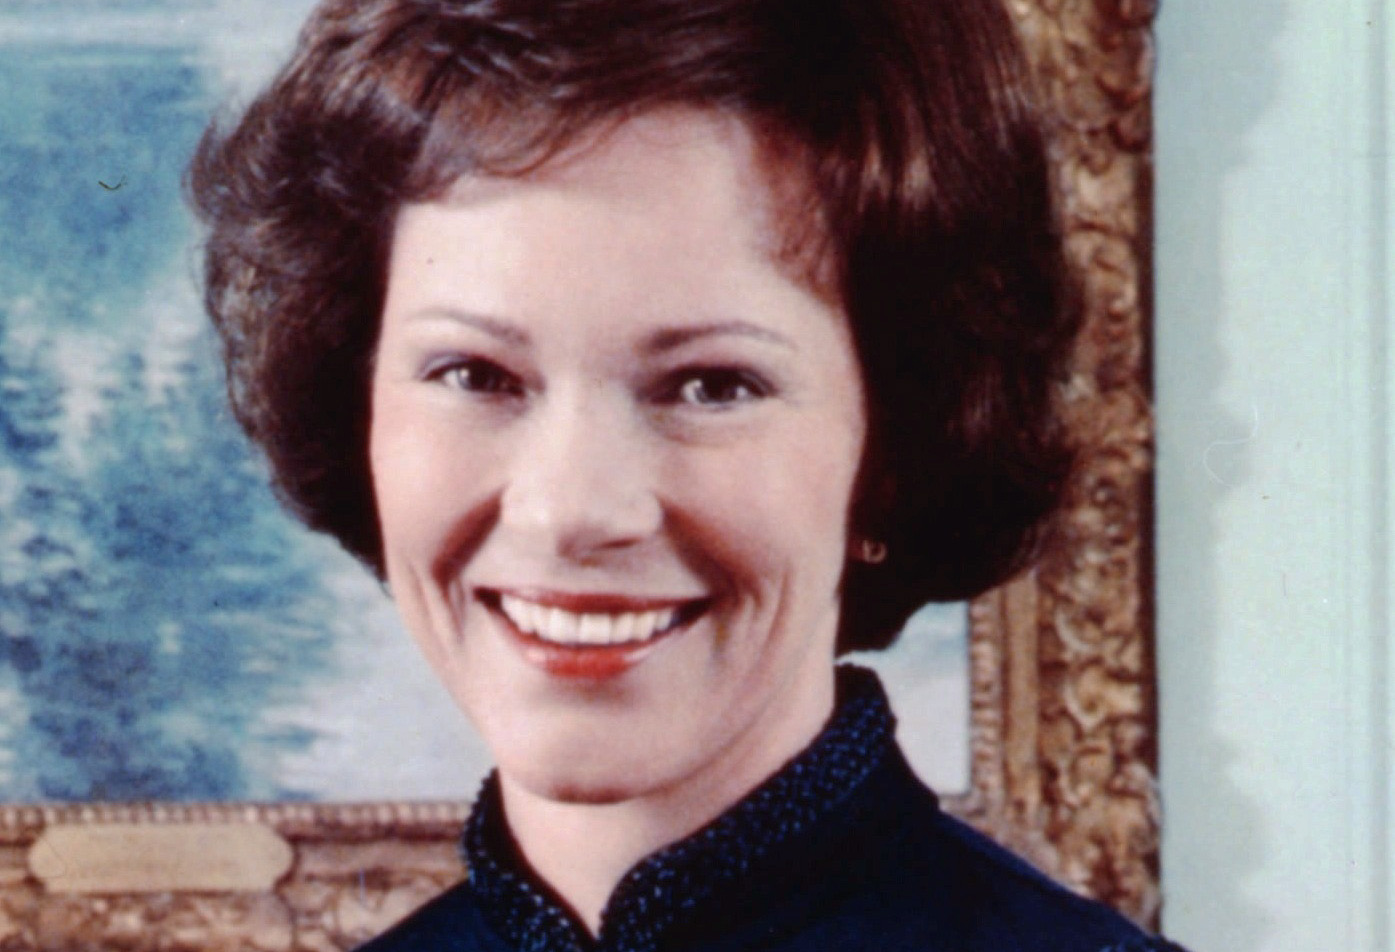 Rosalynn Carter, former First Lady of the United States